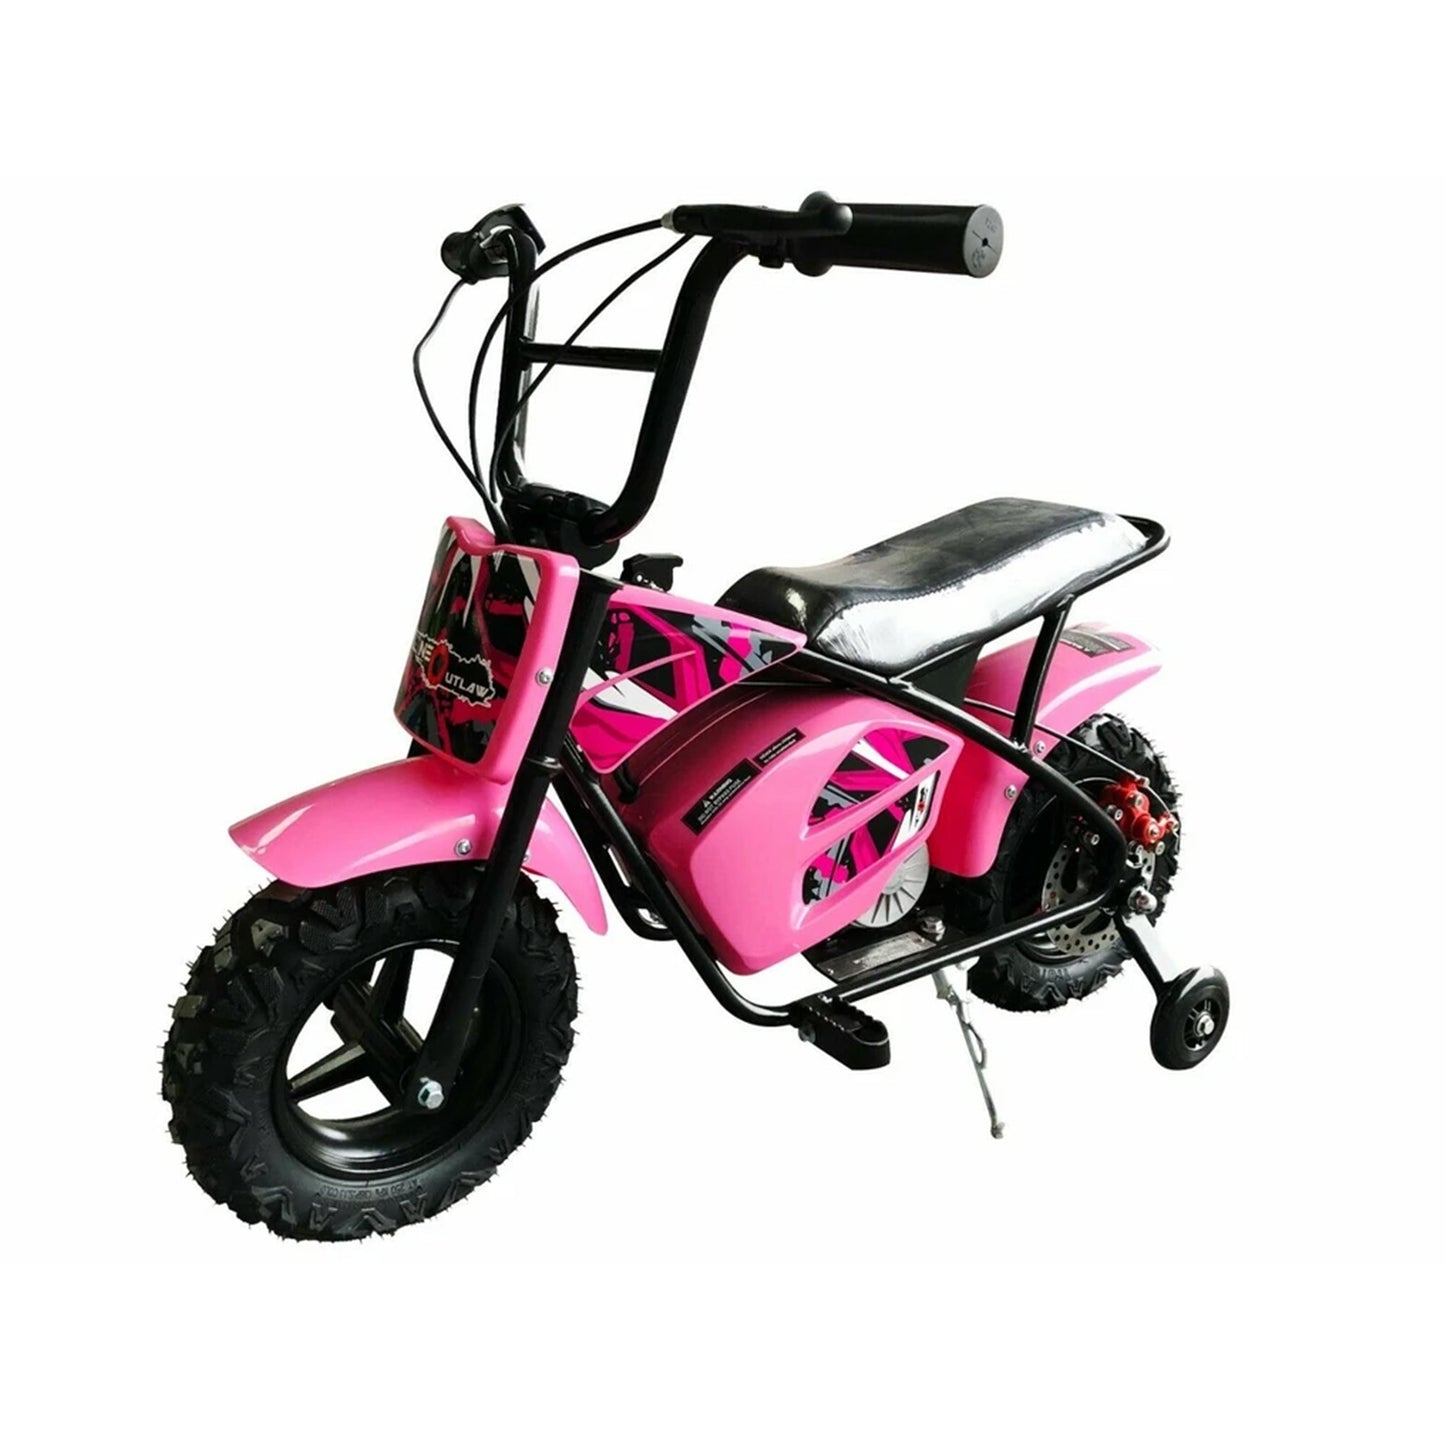 "Pink Mini Dirtbike Scrambler Electric Ride for Kids with Stabilisers and Twist N Go Throttle over White Background"